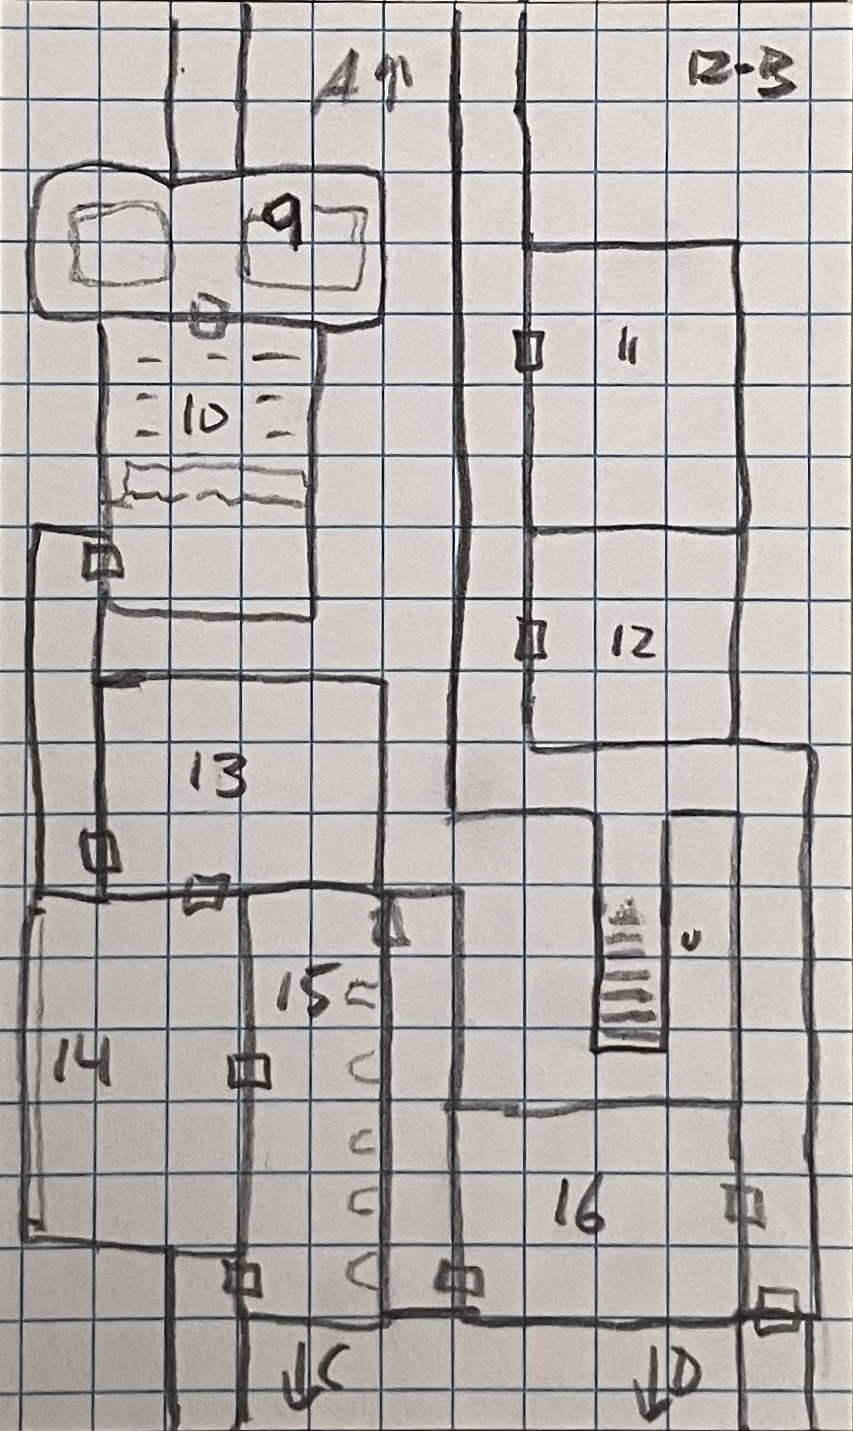 Map of Dungeon Level 12-B